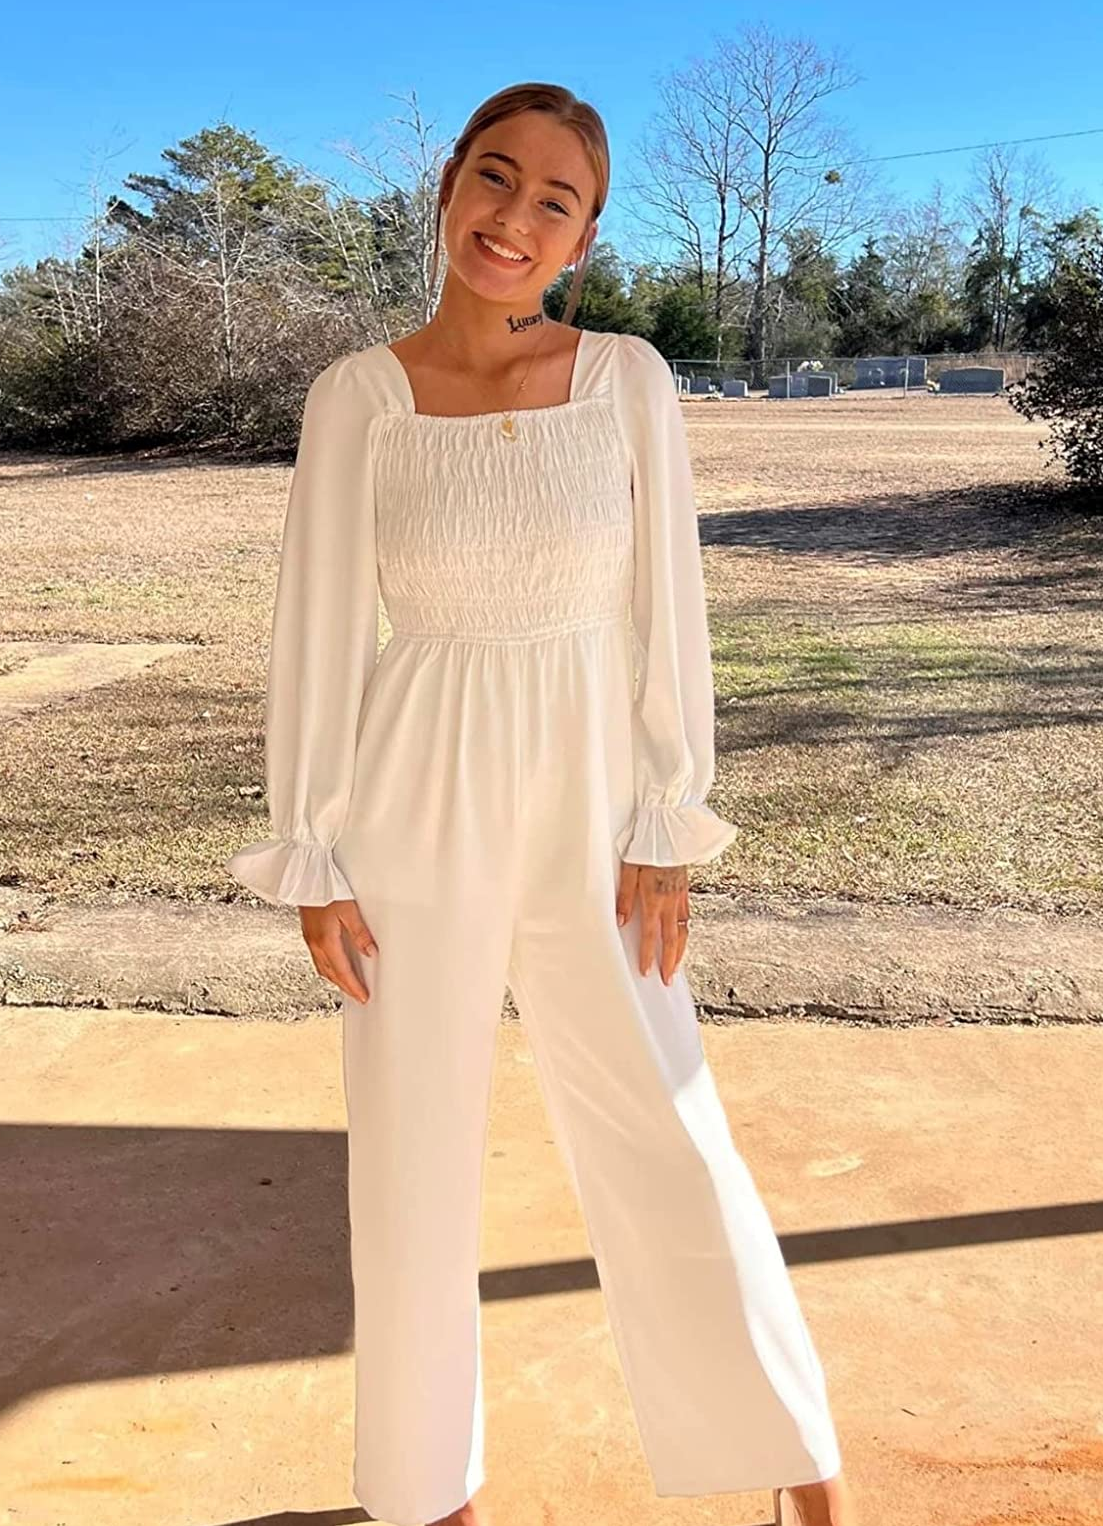 s Best-Selling $37 Jumpsuit Is So Comfy and Cute